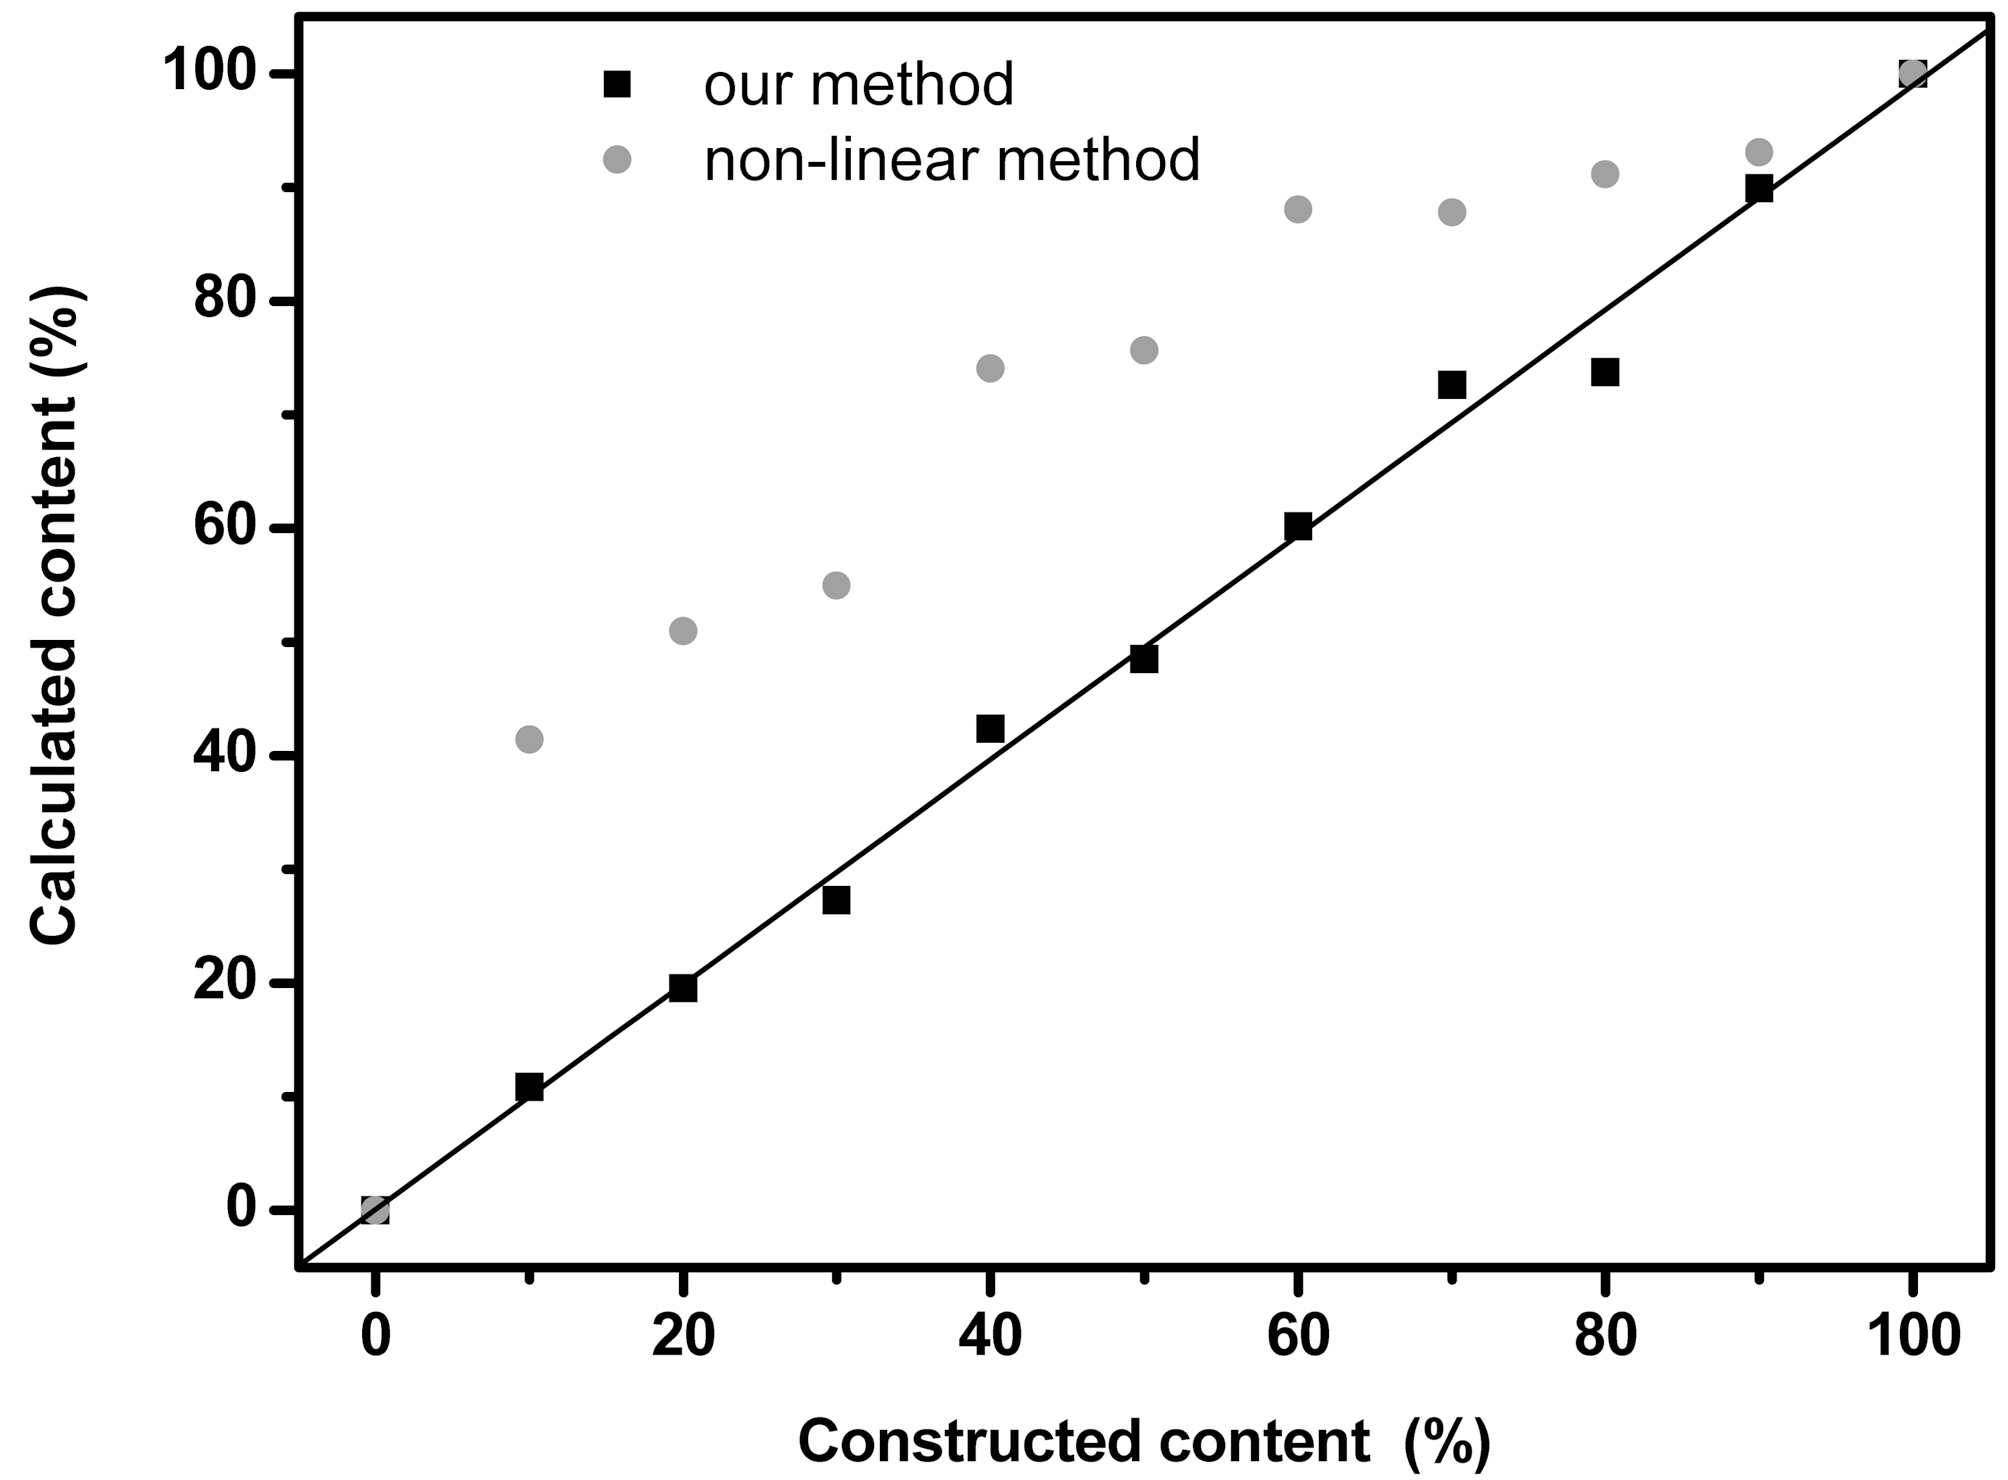 Evaluated content vs. Constructed content of SWCNTs calculated with our method(square) and non-linear method(circle).